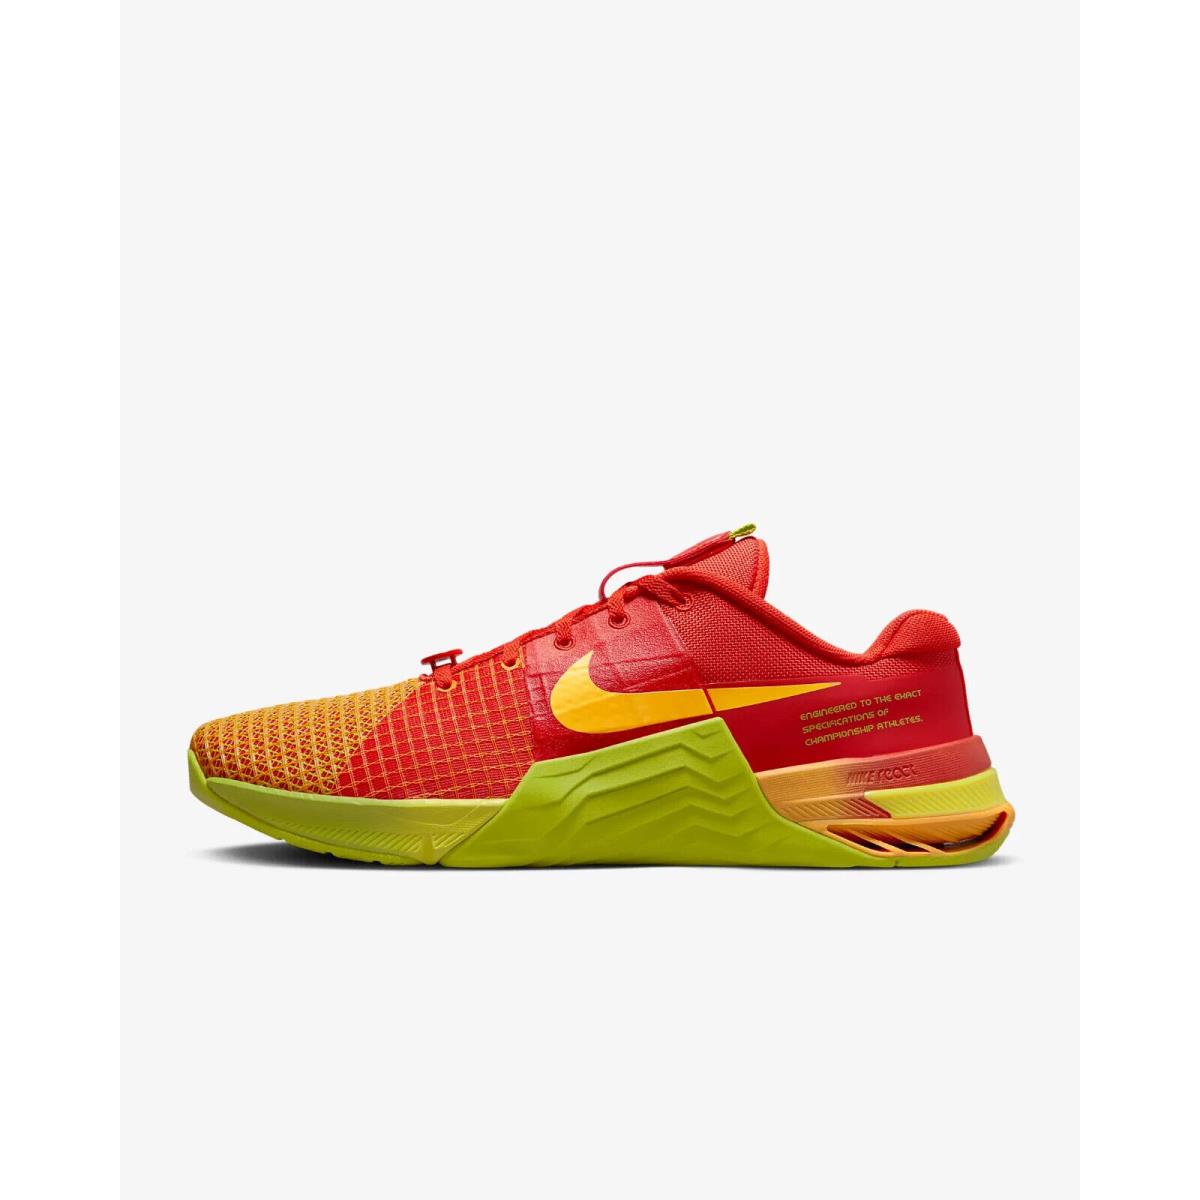 Nike Metcon 8 Amp Picante Red Volt Training Shoes sz 11